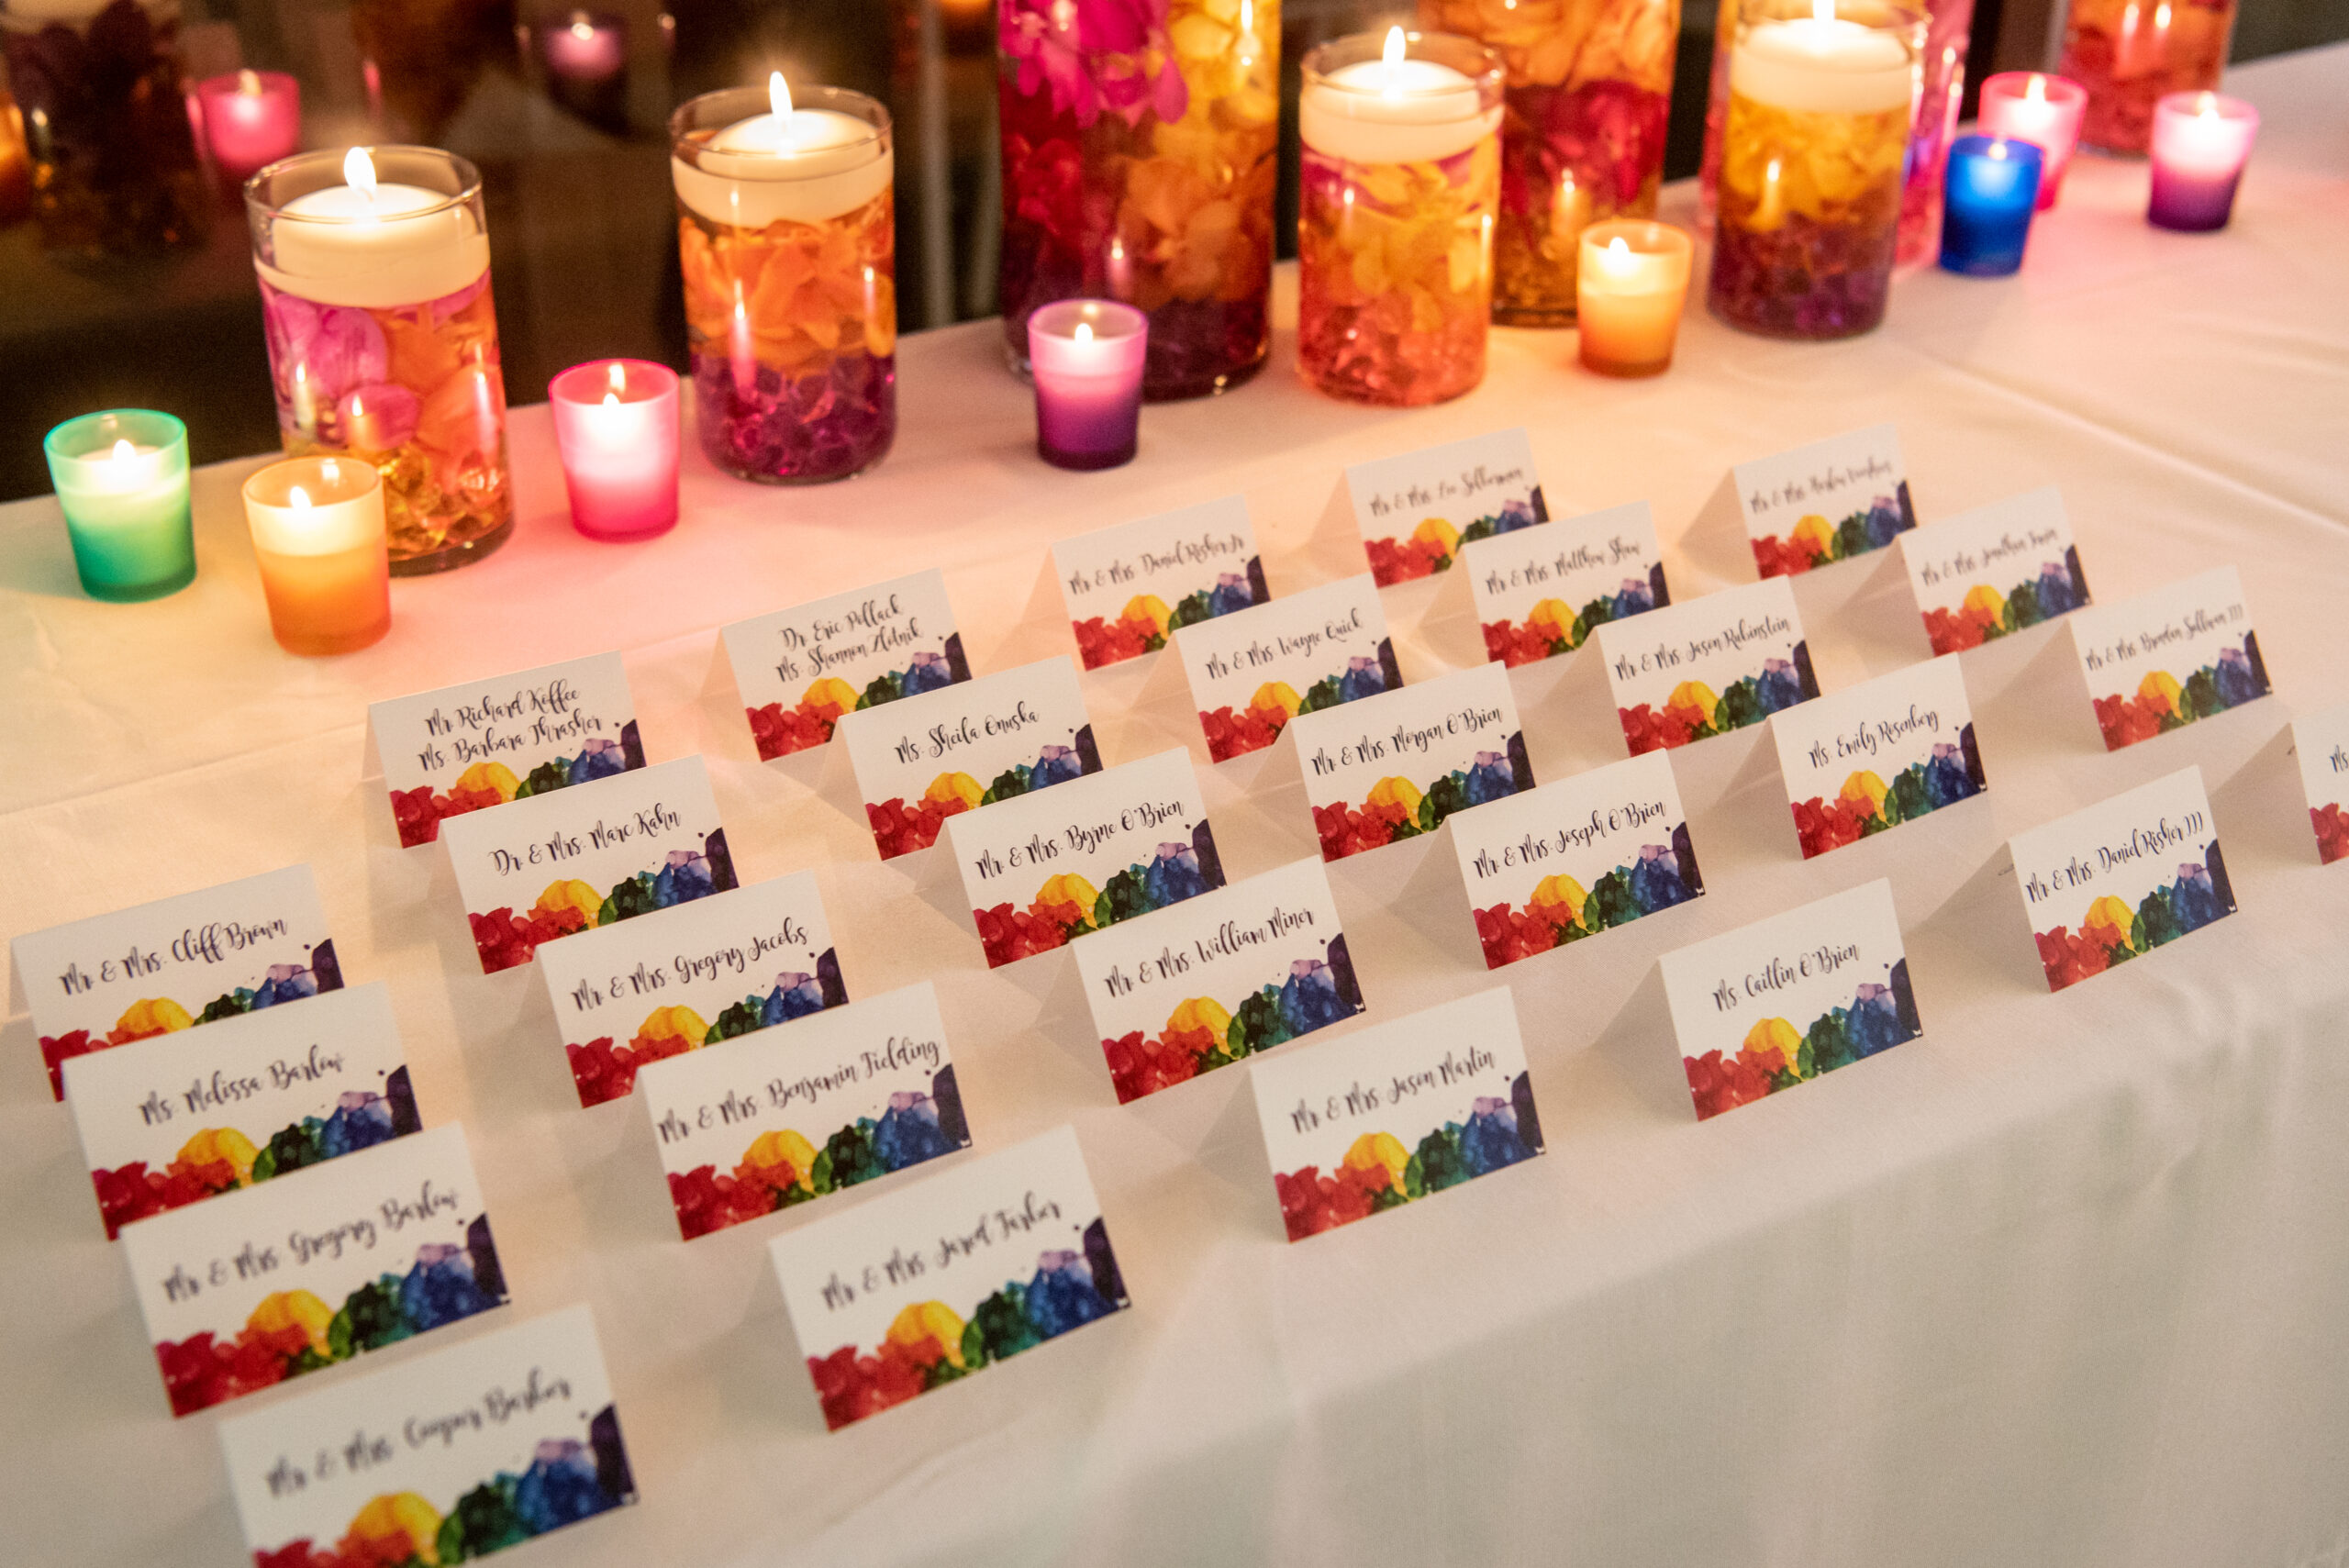 Escort cards at Hanna's colorful rainbow paper lantern Bat Mitzvah at VisArts | Pop Color Events | Adding a Pop of Color to Bar & Bat Mitzvahs in DC, MD & VA | Photo by: Greg Land